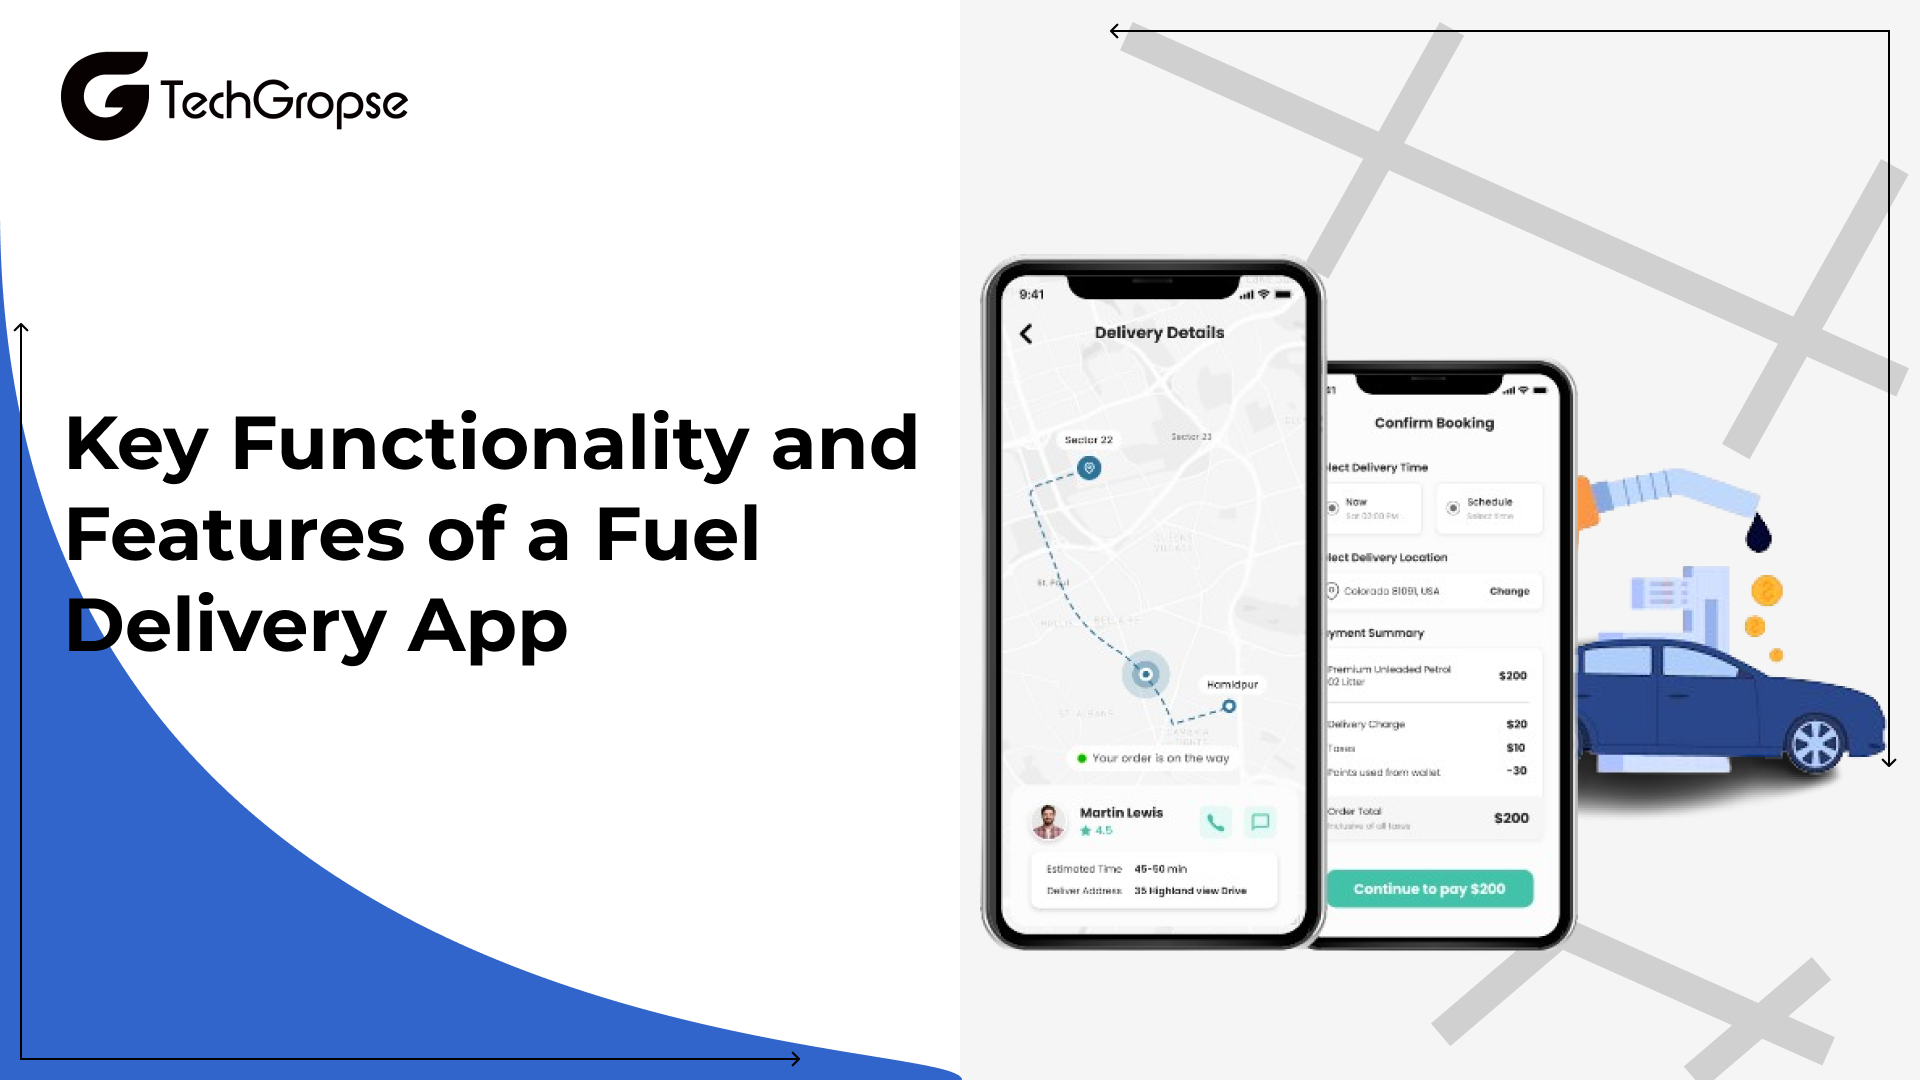 13 Key Functionality and Features of a Fuel Delivery App